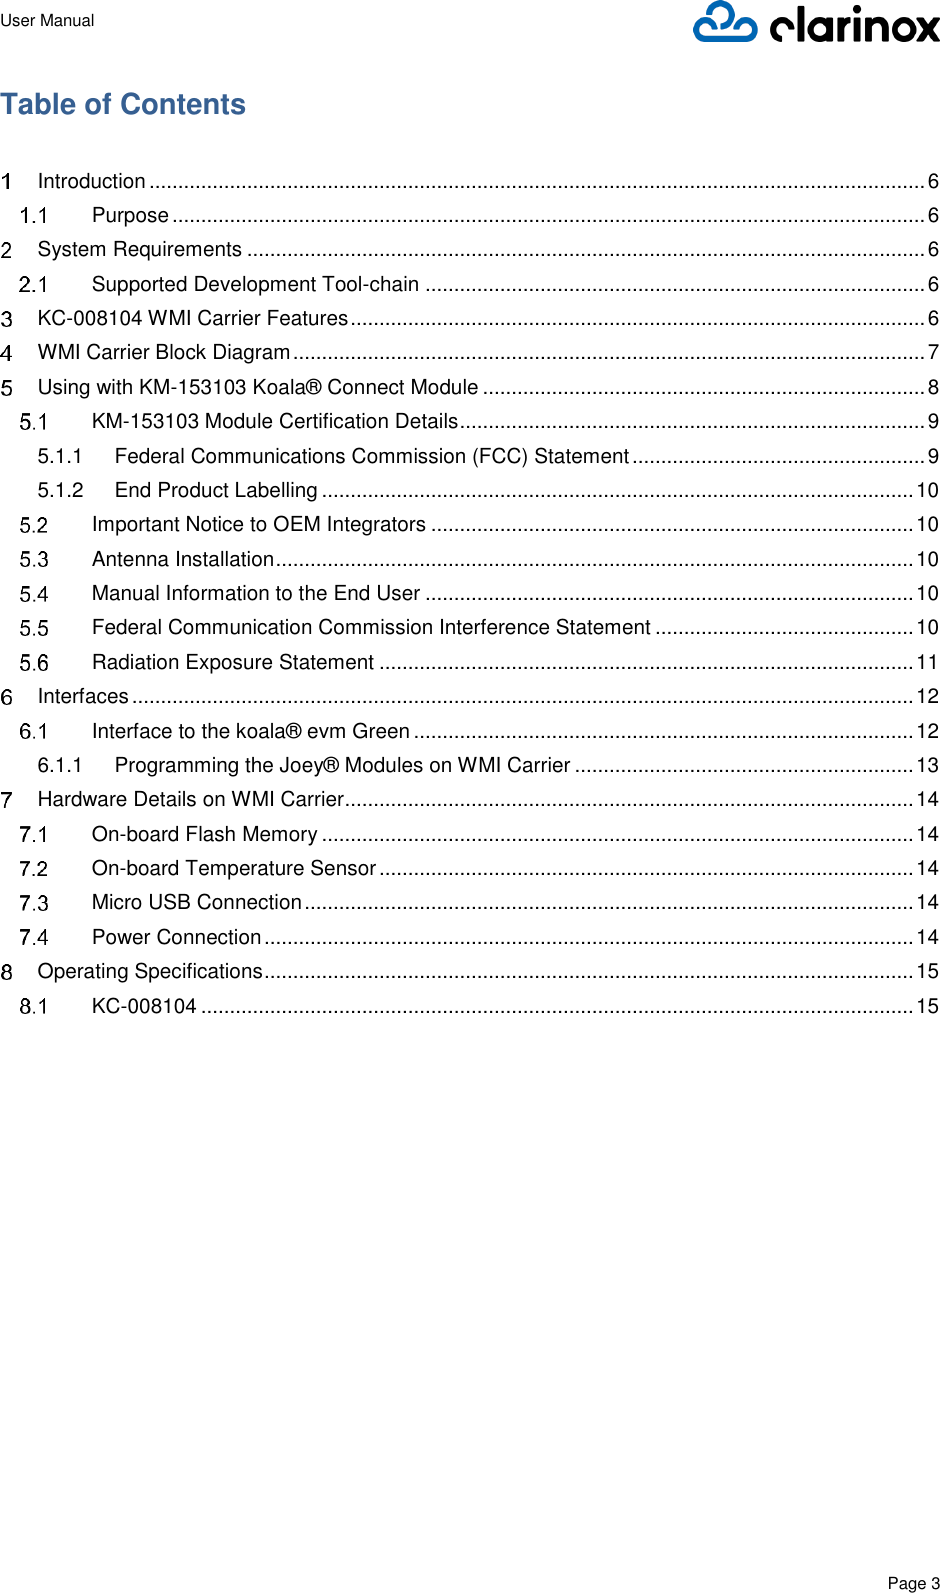 User Manual      Page 3  Table of Contents    Introduction ....................................................................................................................................... 6  Purpose ................................................................................................................................... 6  System Requirements ...................................................................................................................... 6  Supported Development Tool-chain ....................................................................................... 6  KC-008104 WMI Carrier Features .................................................................................................... 6  WMI Carrier Block Diagram .............................................................................................................. 7  Using with KM-153103 Koala® Connect Module ............................................................................. 8  KM-153103 Module Certification Details ................................................................................. 9 5.1.1 Federal Communications Commission (FCC) Statement ................................................... 9 5.1.2 End Product Labelling ....................................................................................................... 10  Important Notice to OEM Integrators .................................................................................... 10  Antenna Installation ............................................................................................................... 10  Manual Information to the End User ..................................................................................... 10  Federal Communication Commission Interference Statement ............................................. 10  Radiation Exposure Statement ............................................................................................. 11  Interfaces ........................................................................................................................................ 12  Interface to the koala® evm Green ....................................................................................... 12 6.1.1 Programming the Joey® Modules on WMI Carrier ........................................................... 13  Hardware Details on WMI Carrier................................................................................................... 14  On-board Flash Memory ....................................................................................................... 14  On-board Temperature Sensor ............................................................................................. 14  Micro USB Connection .......................................................................................................... 14  Power Connection ................................................................................................................. 14  Operating Specifications ................................................................................................................. 15  KC-008104 ............................................................................................................................ 15      